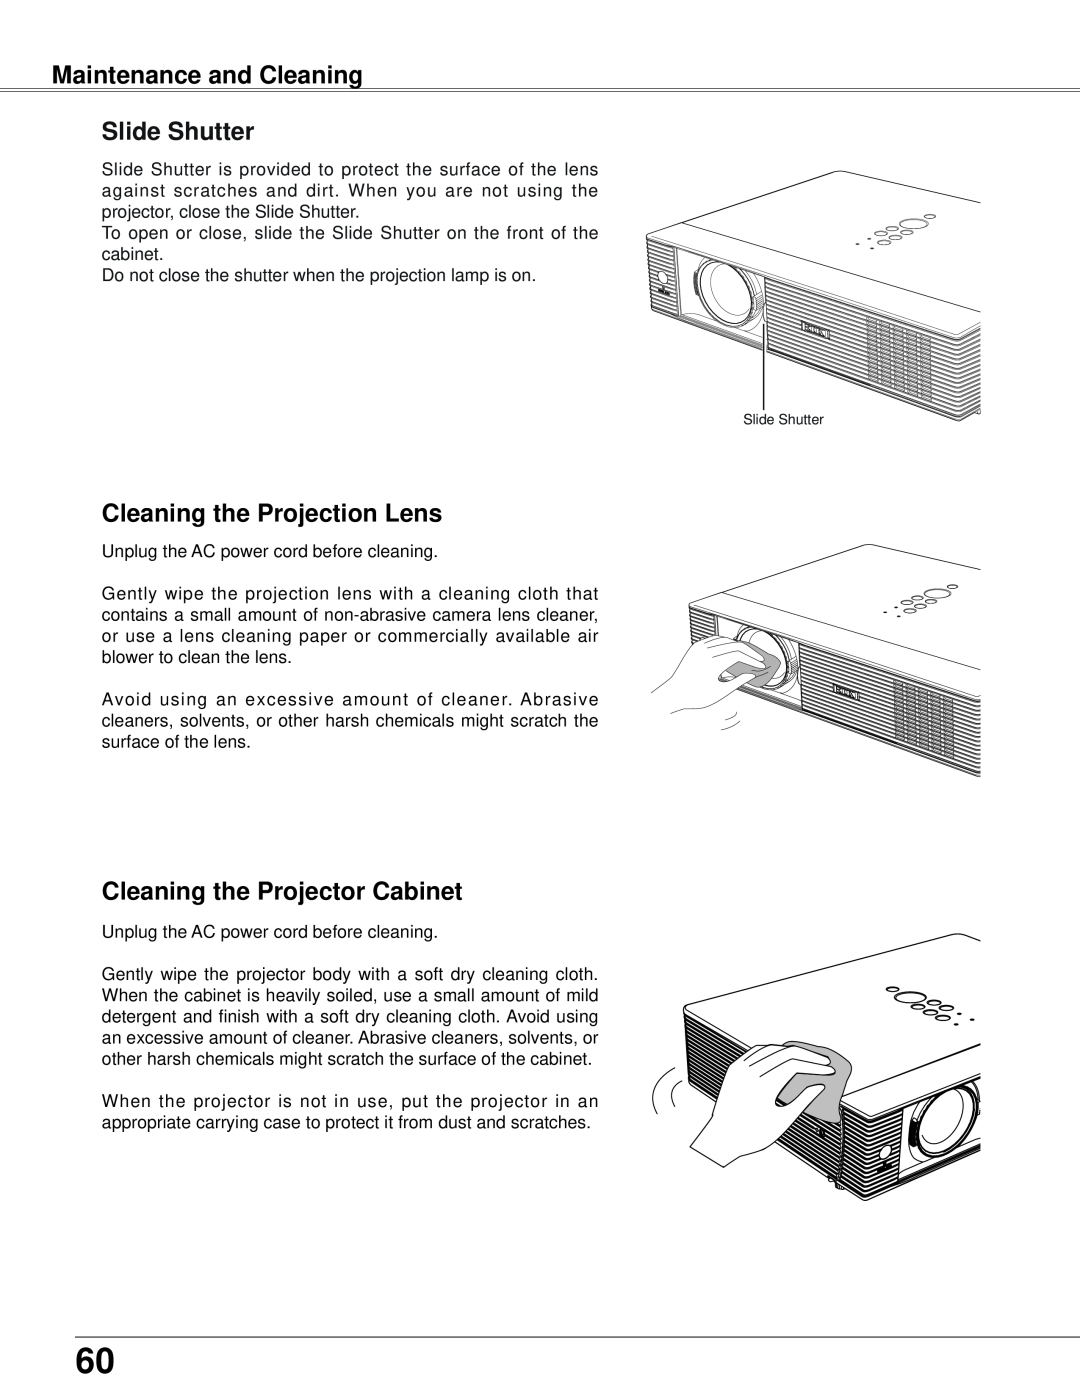 Eiki LC-XB42N Maintenance and Cleaning Slide Shutter, Cleaning the Projection Lens, Cleaning the Projector Cabinet 